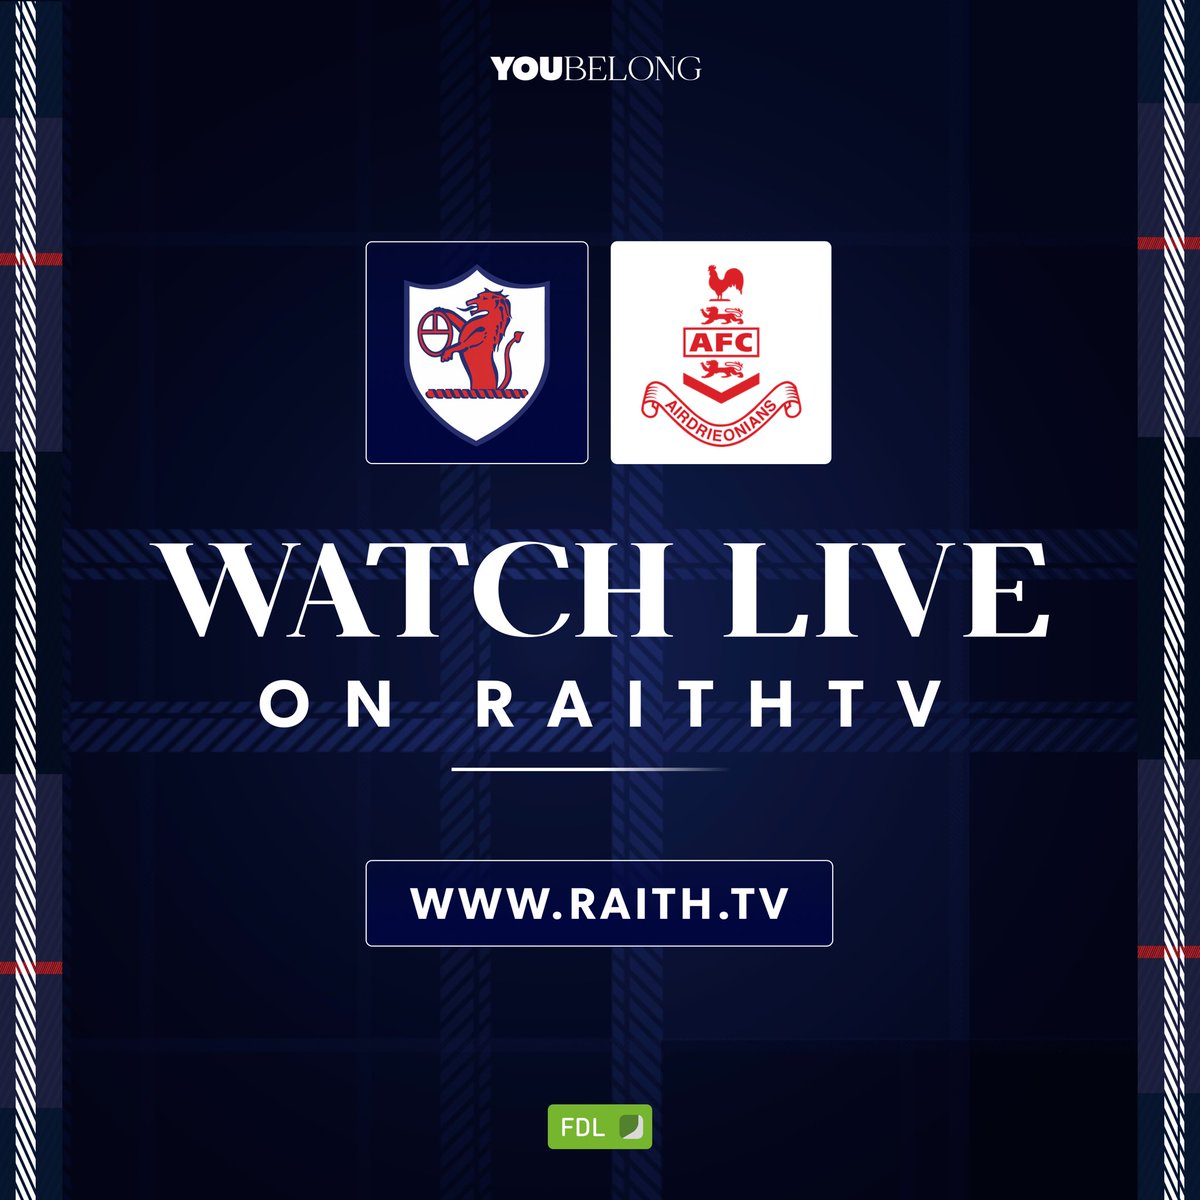 Can’t make it tonight but want to watch?

Our match vs Airdrie will be streamed live on RaithTV.

Watch in the UK for just £15 on PPV, or abroad with our international subscription:

📺 bit.ly/WatchRaithTV

#YouBelong